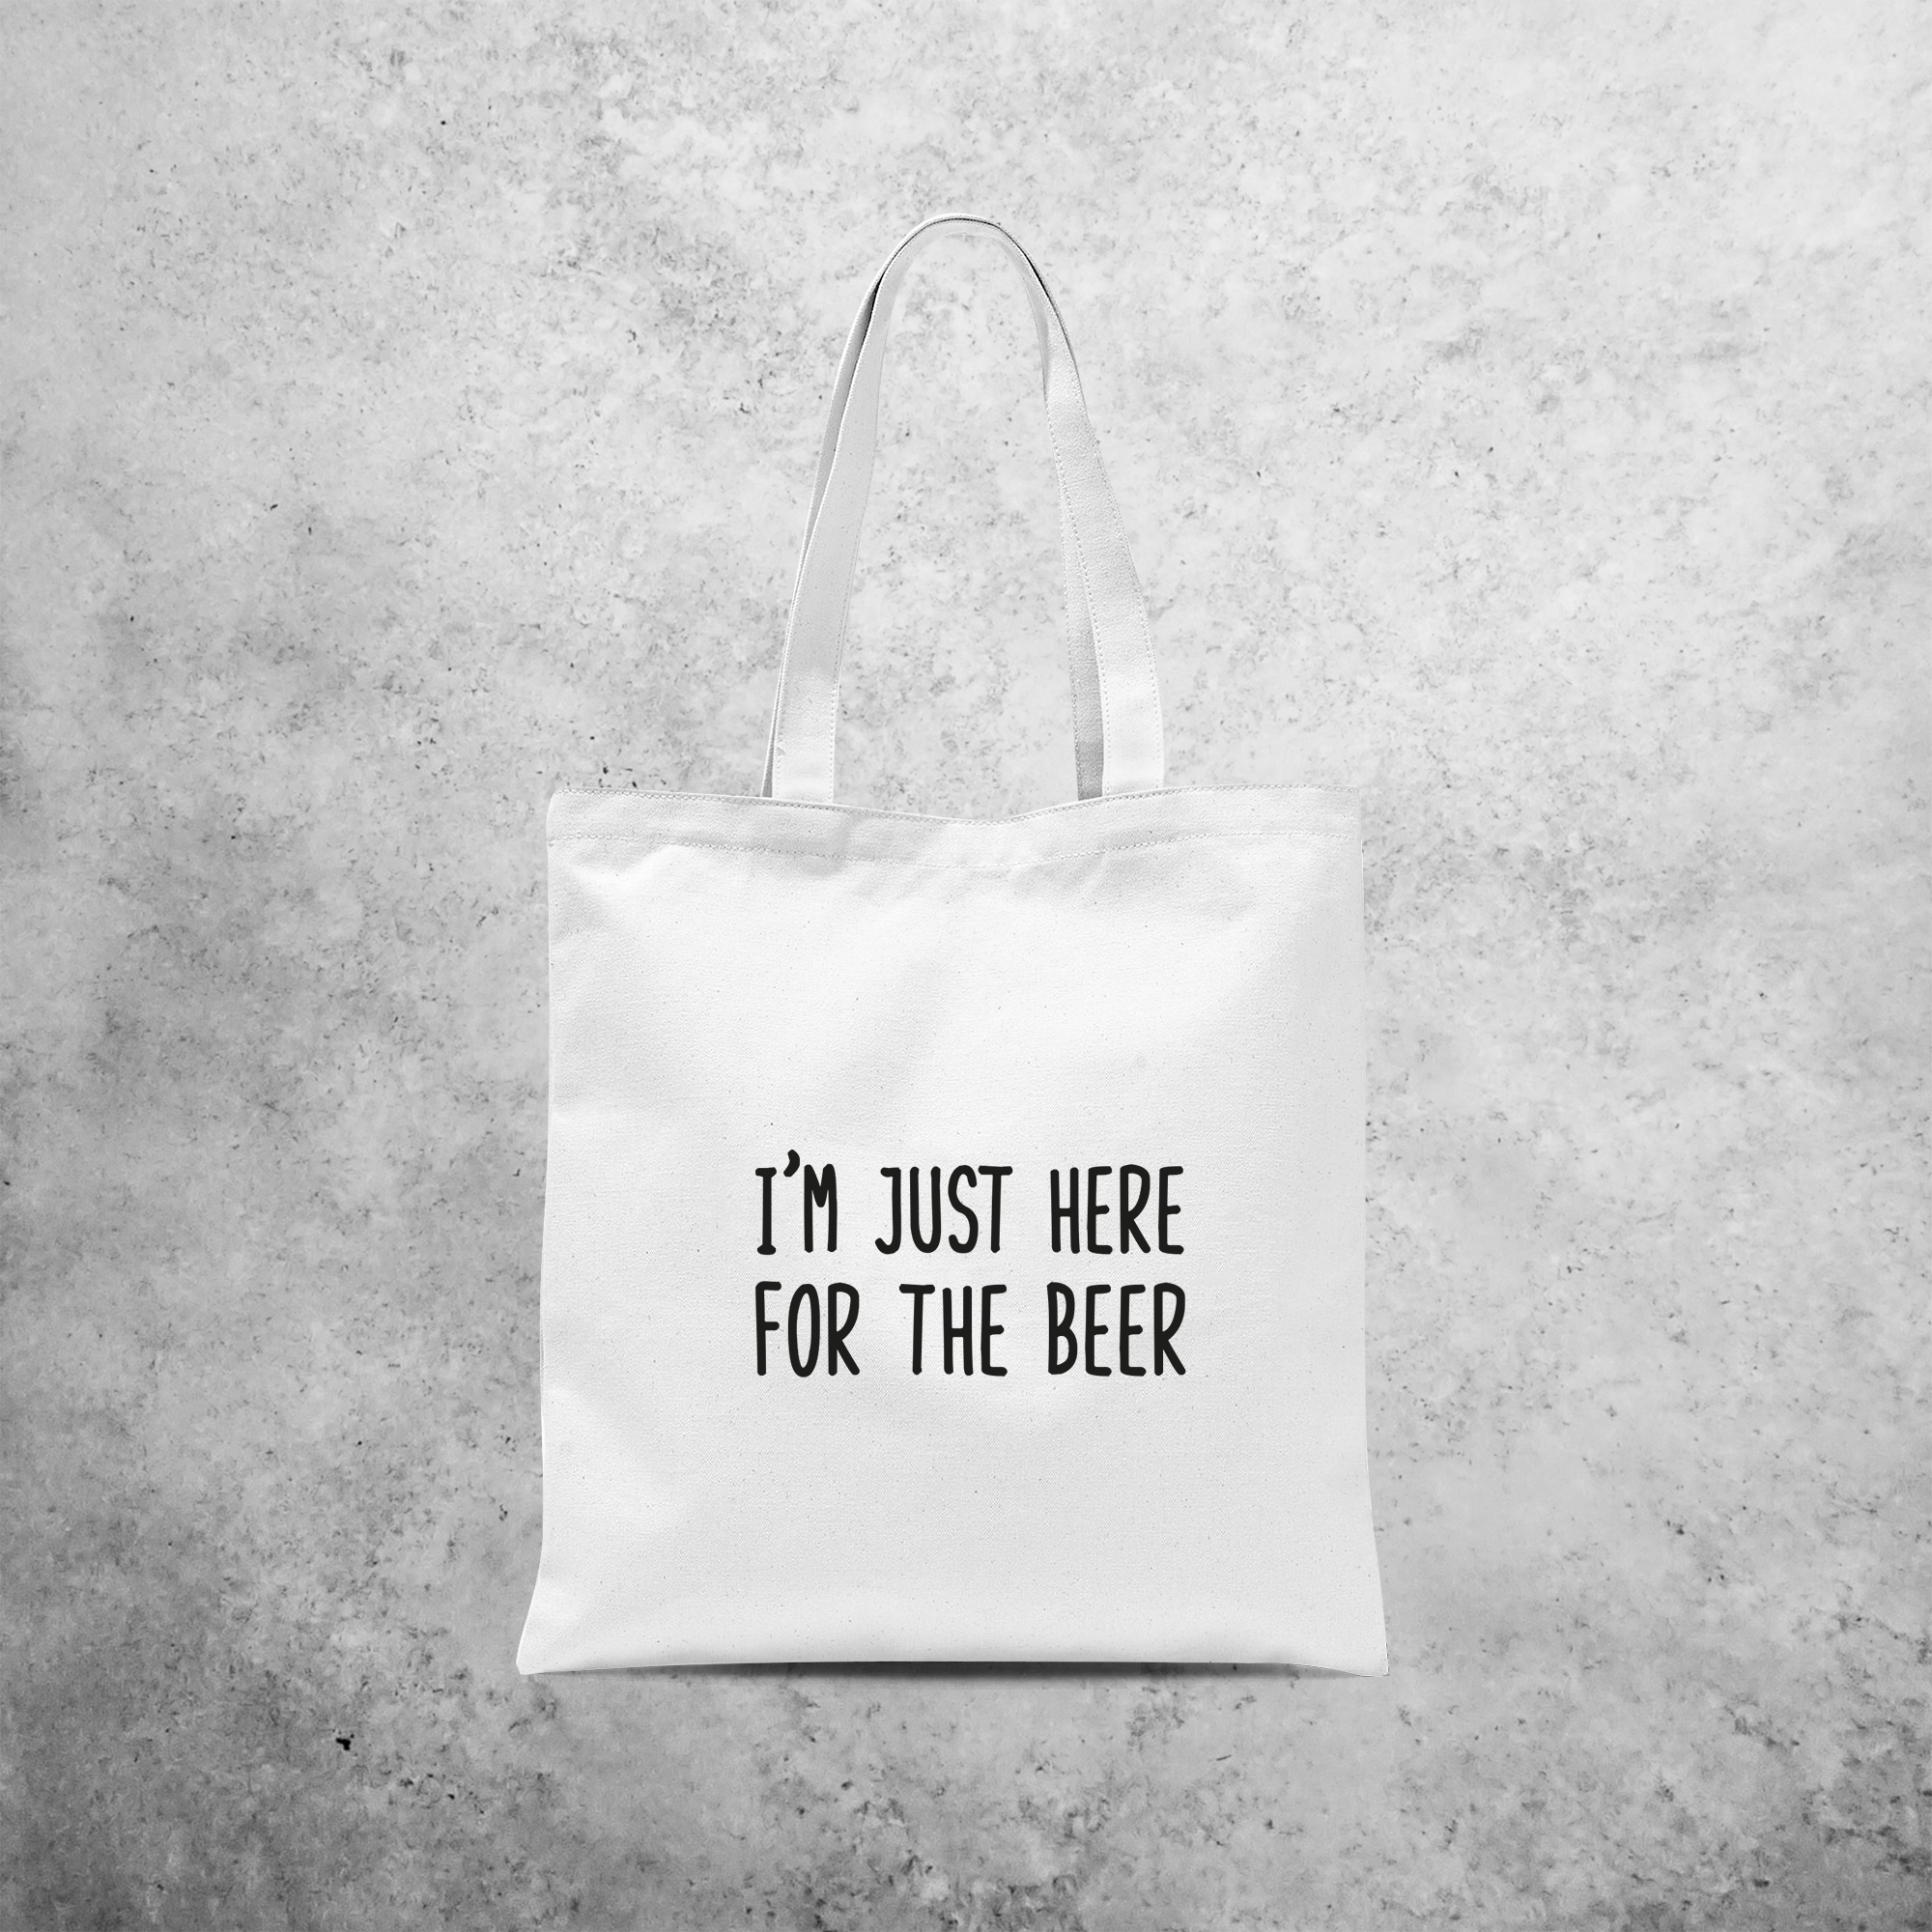 'I'm just here for the beer' tote bag